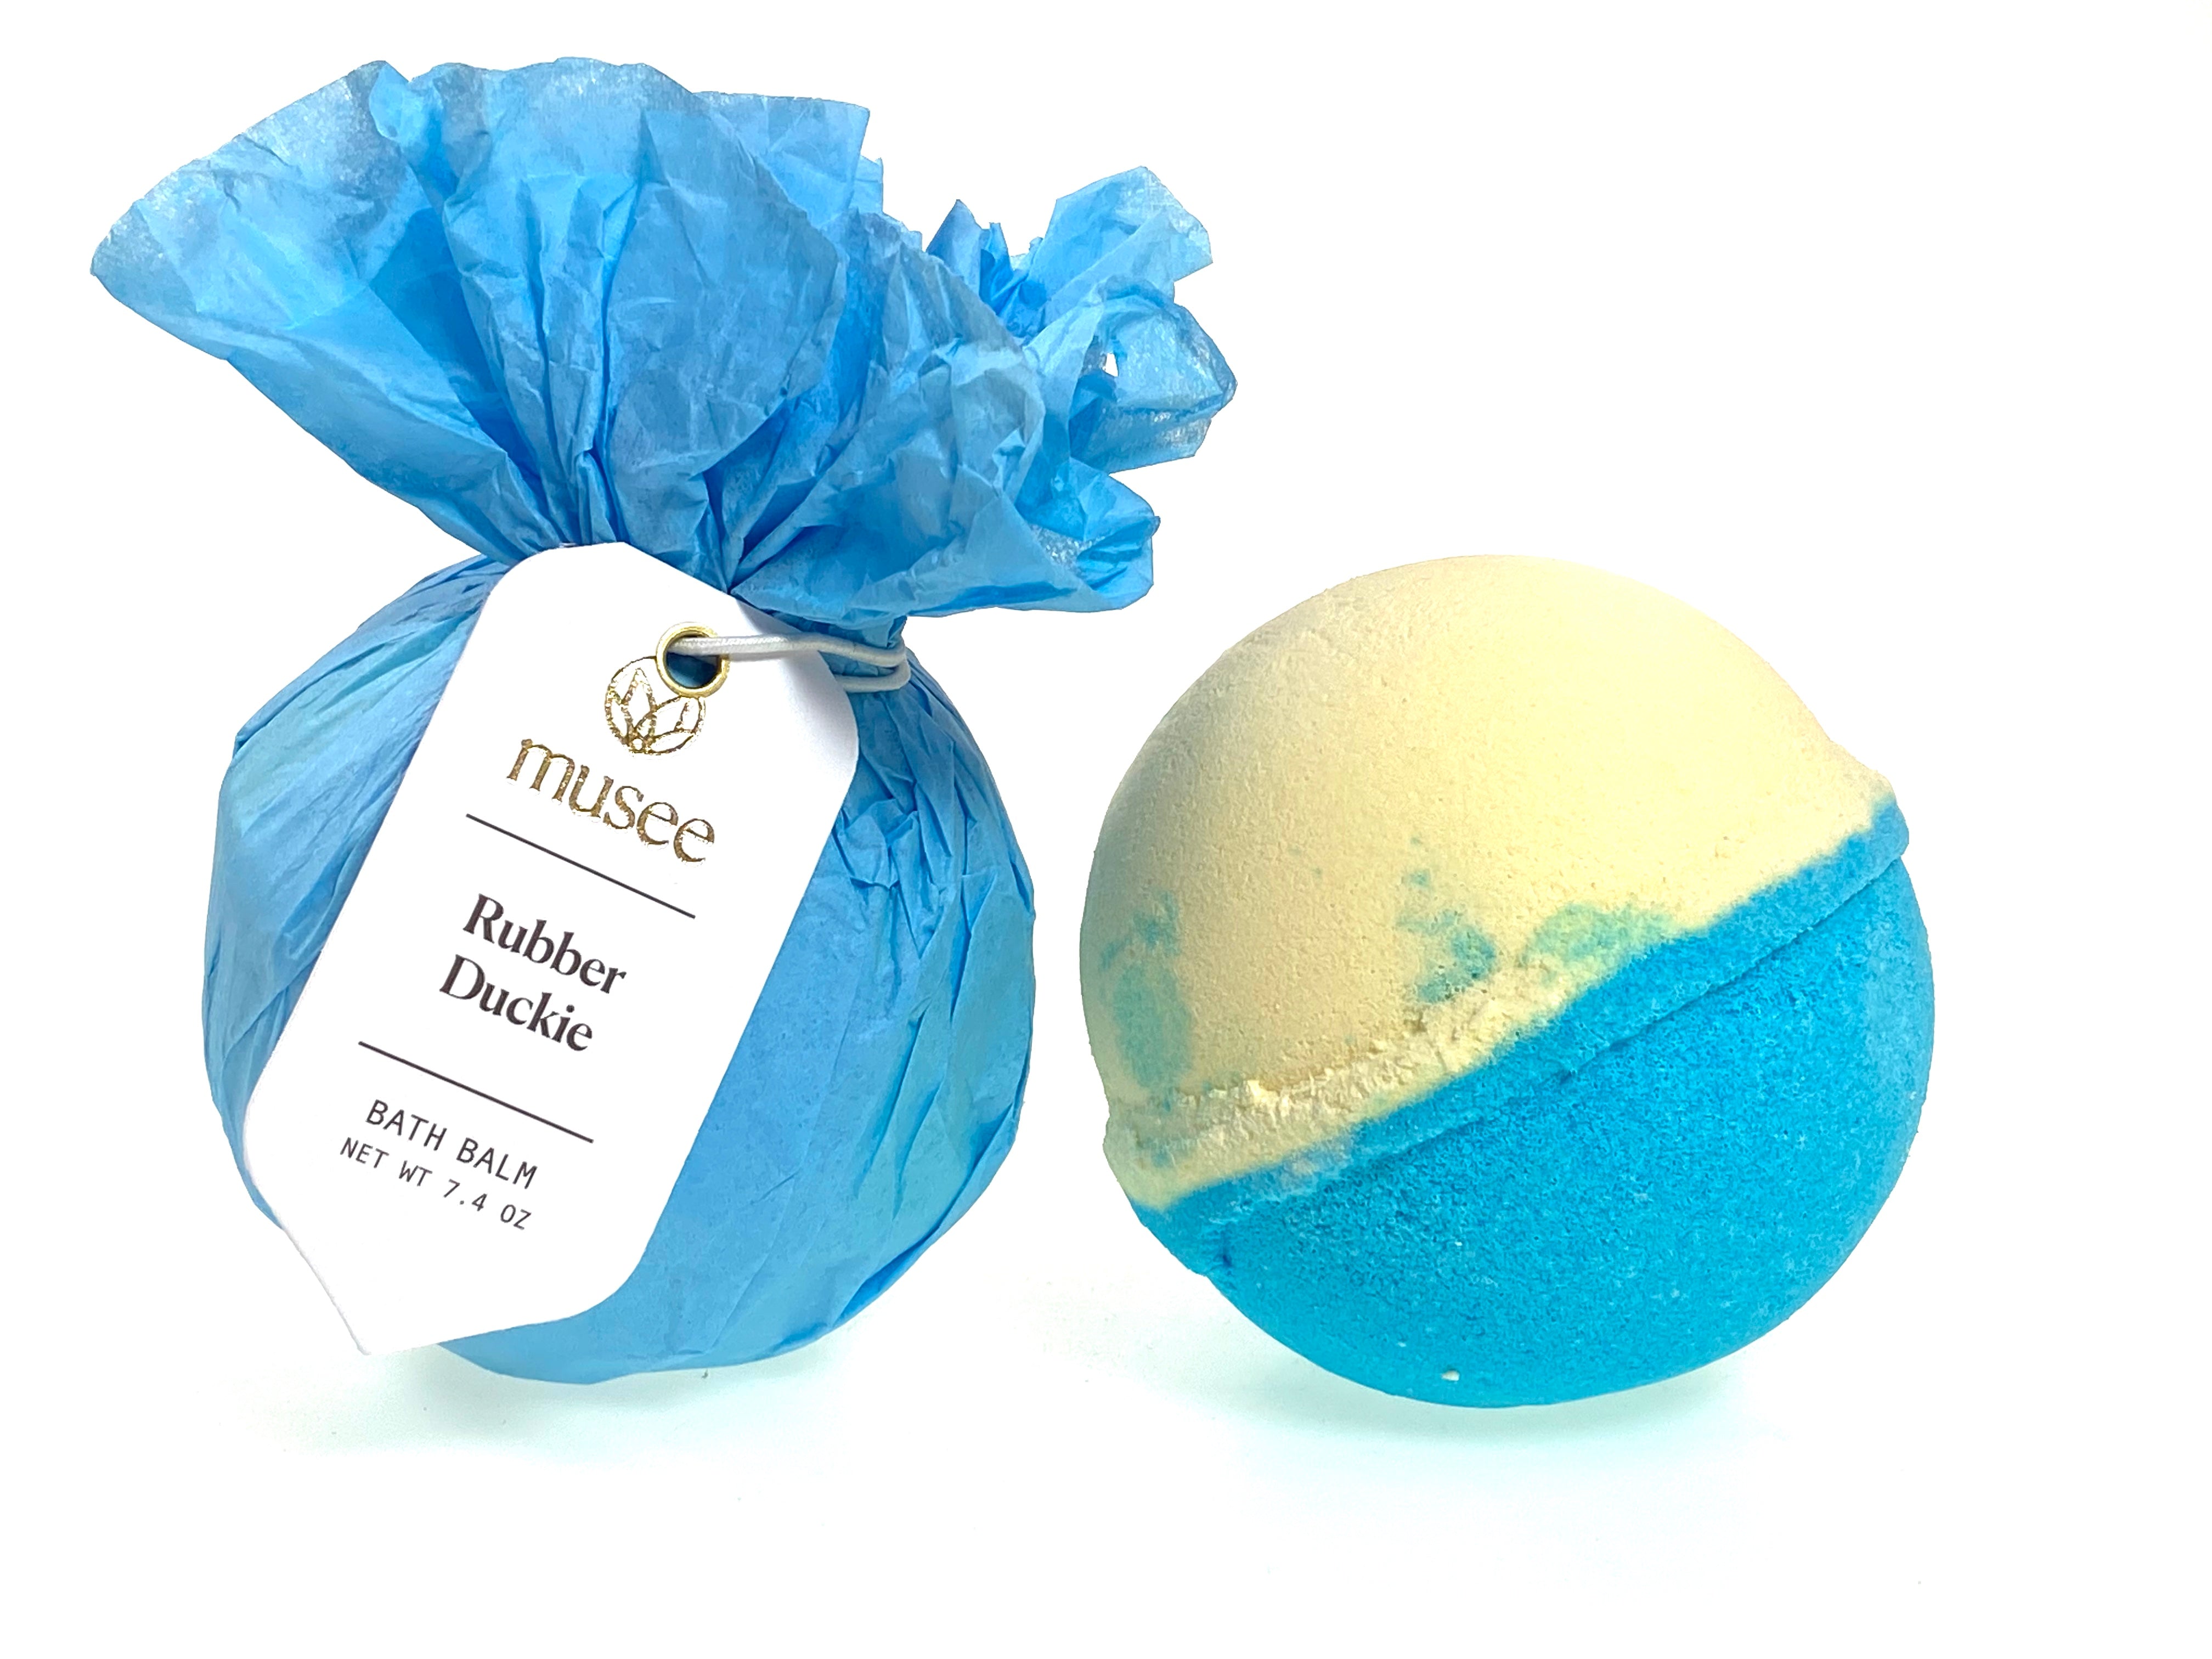 Bath Balm - Tropical Fruit with Rubber Duckie inside    